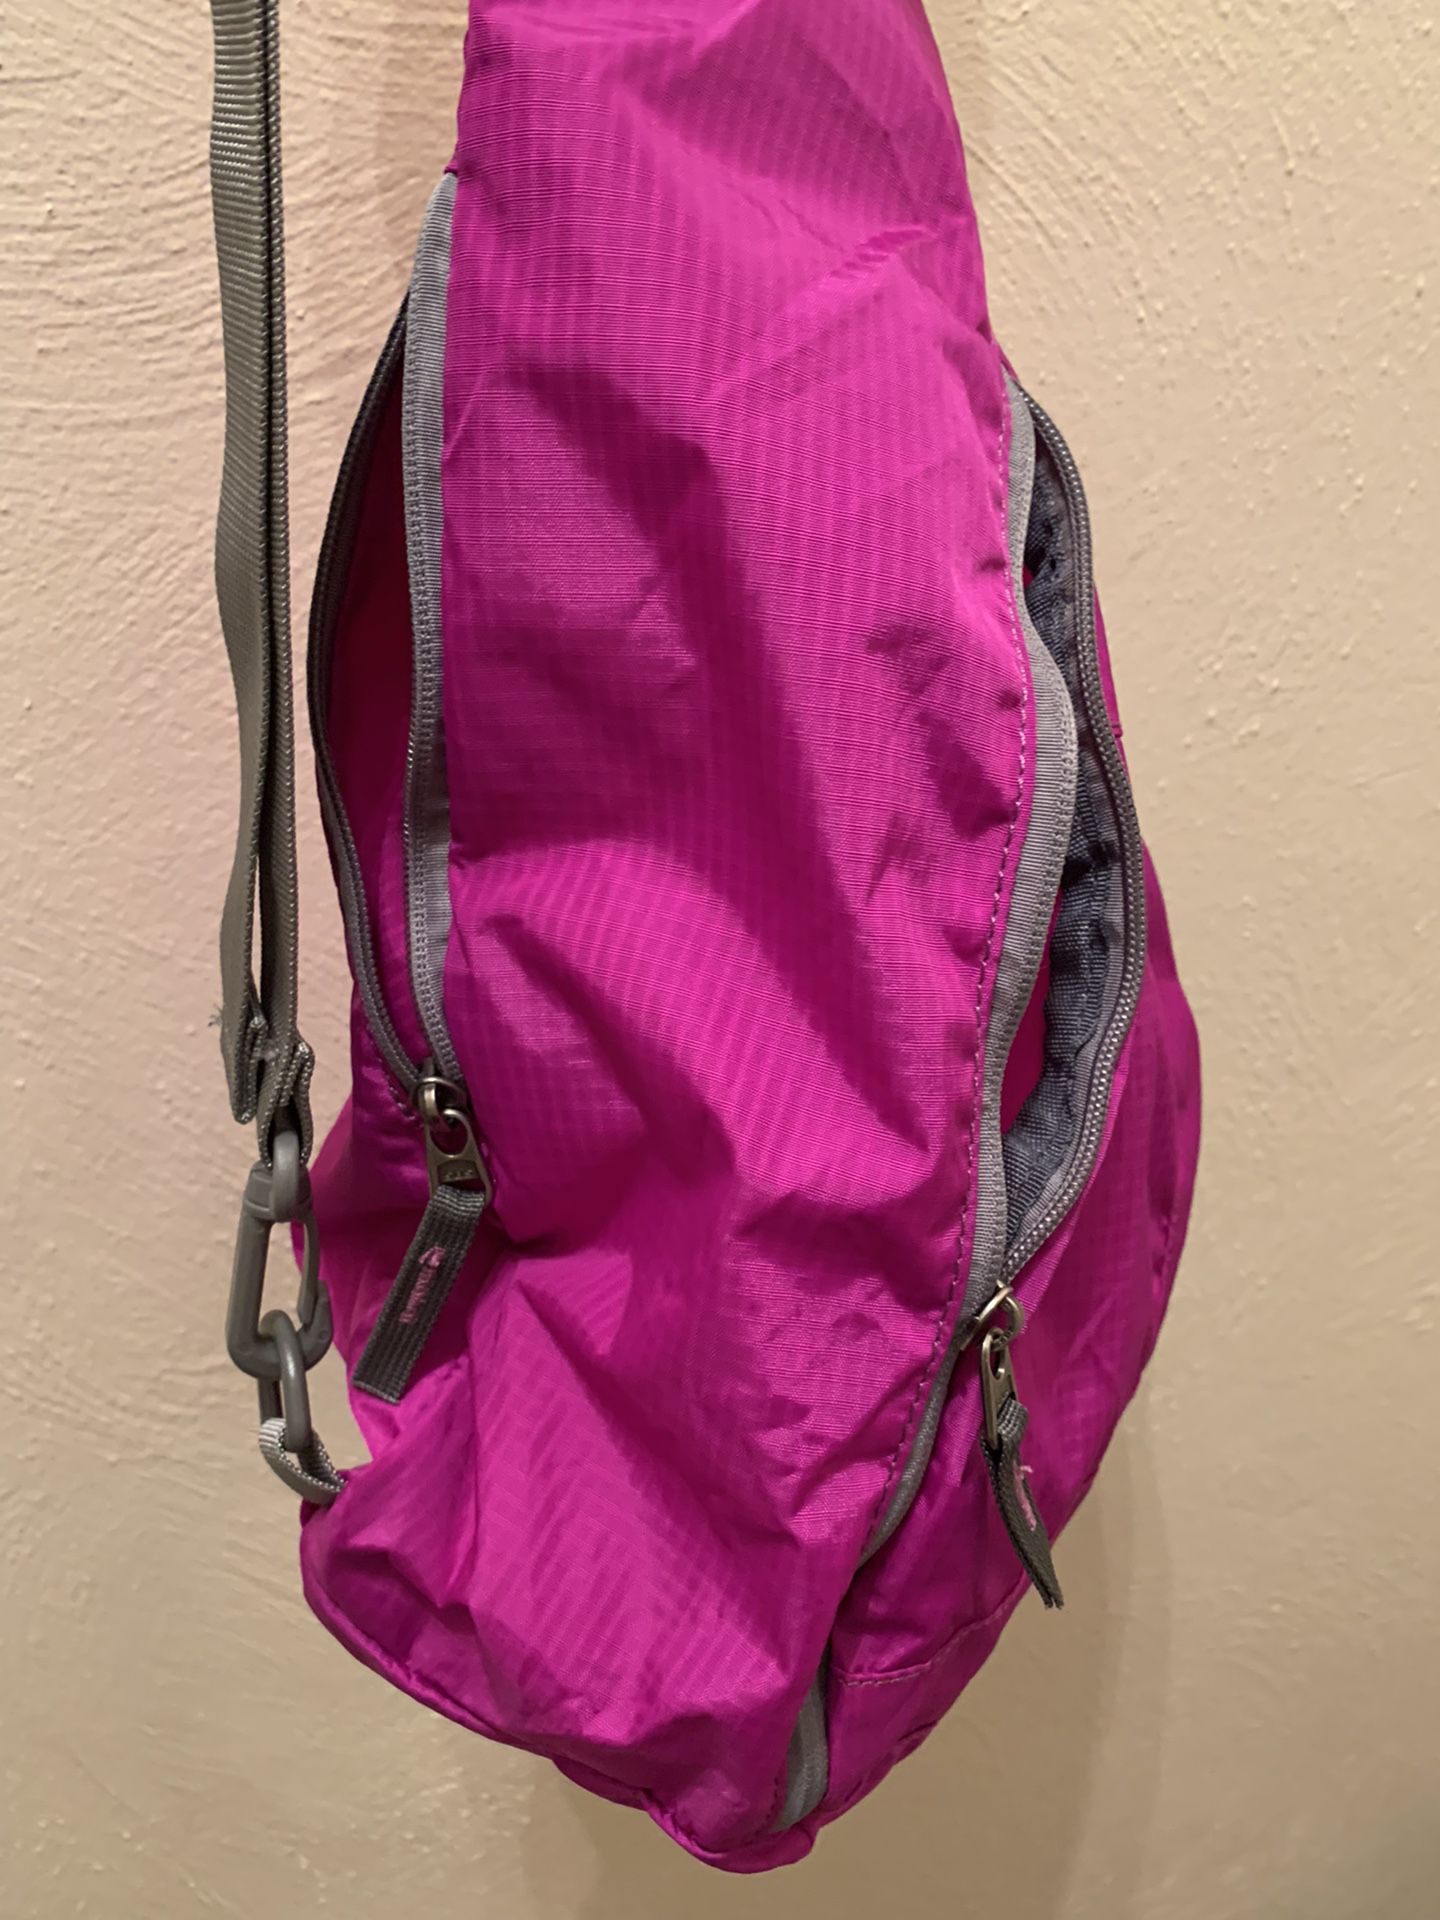 WATERFLY Crossbody Sling Backpack Sling Bag Travel Hiking Chest Bag Daypack  for Sale in Fairfax, VA - OfferUp